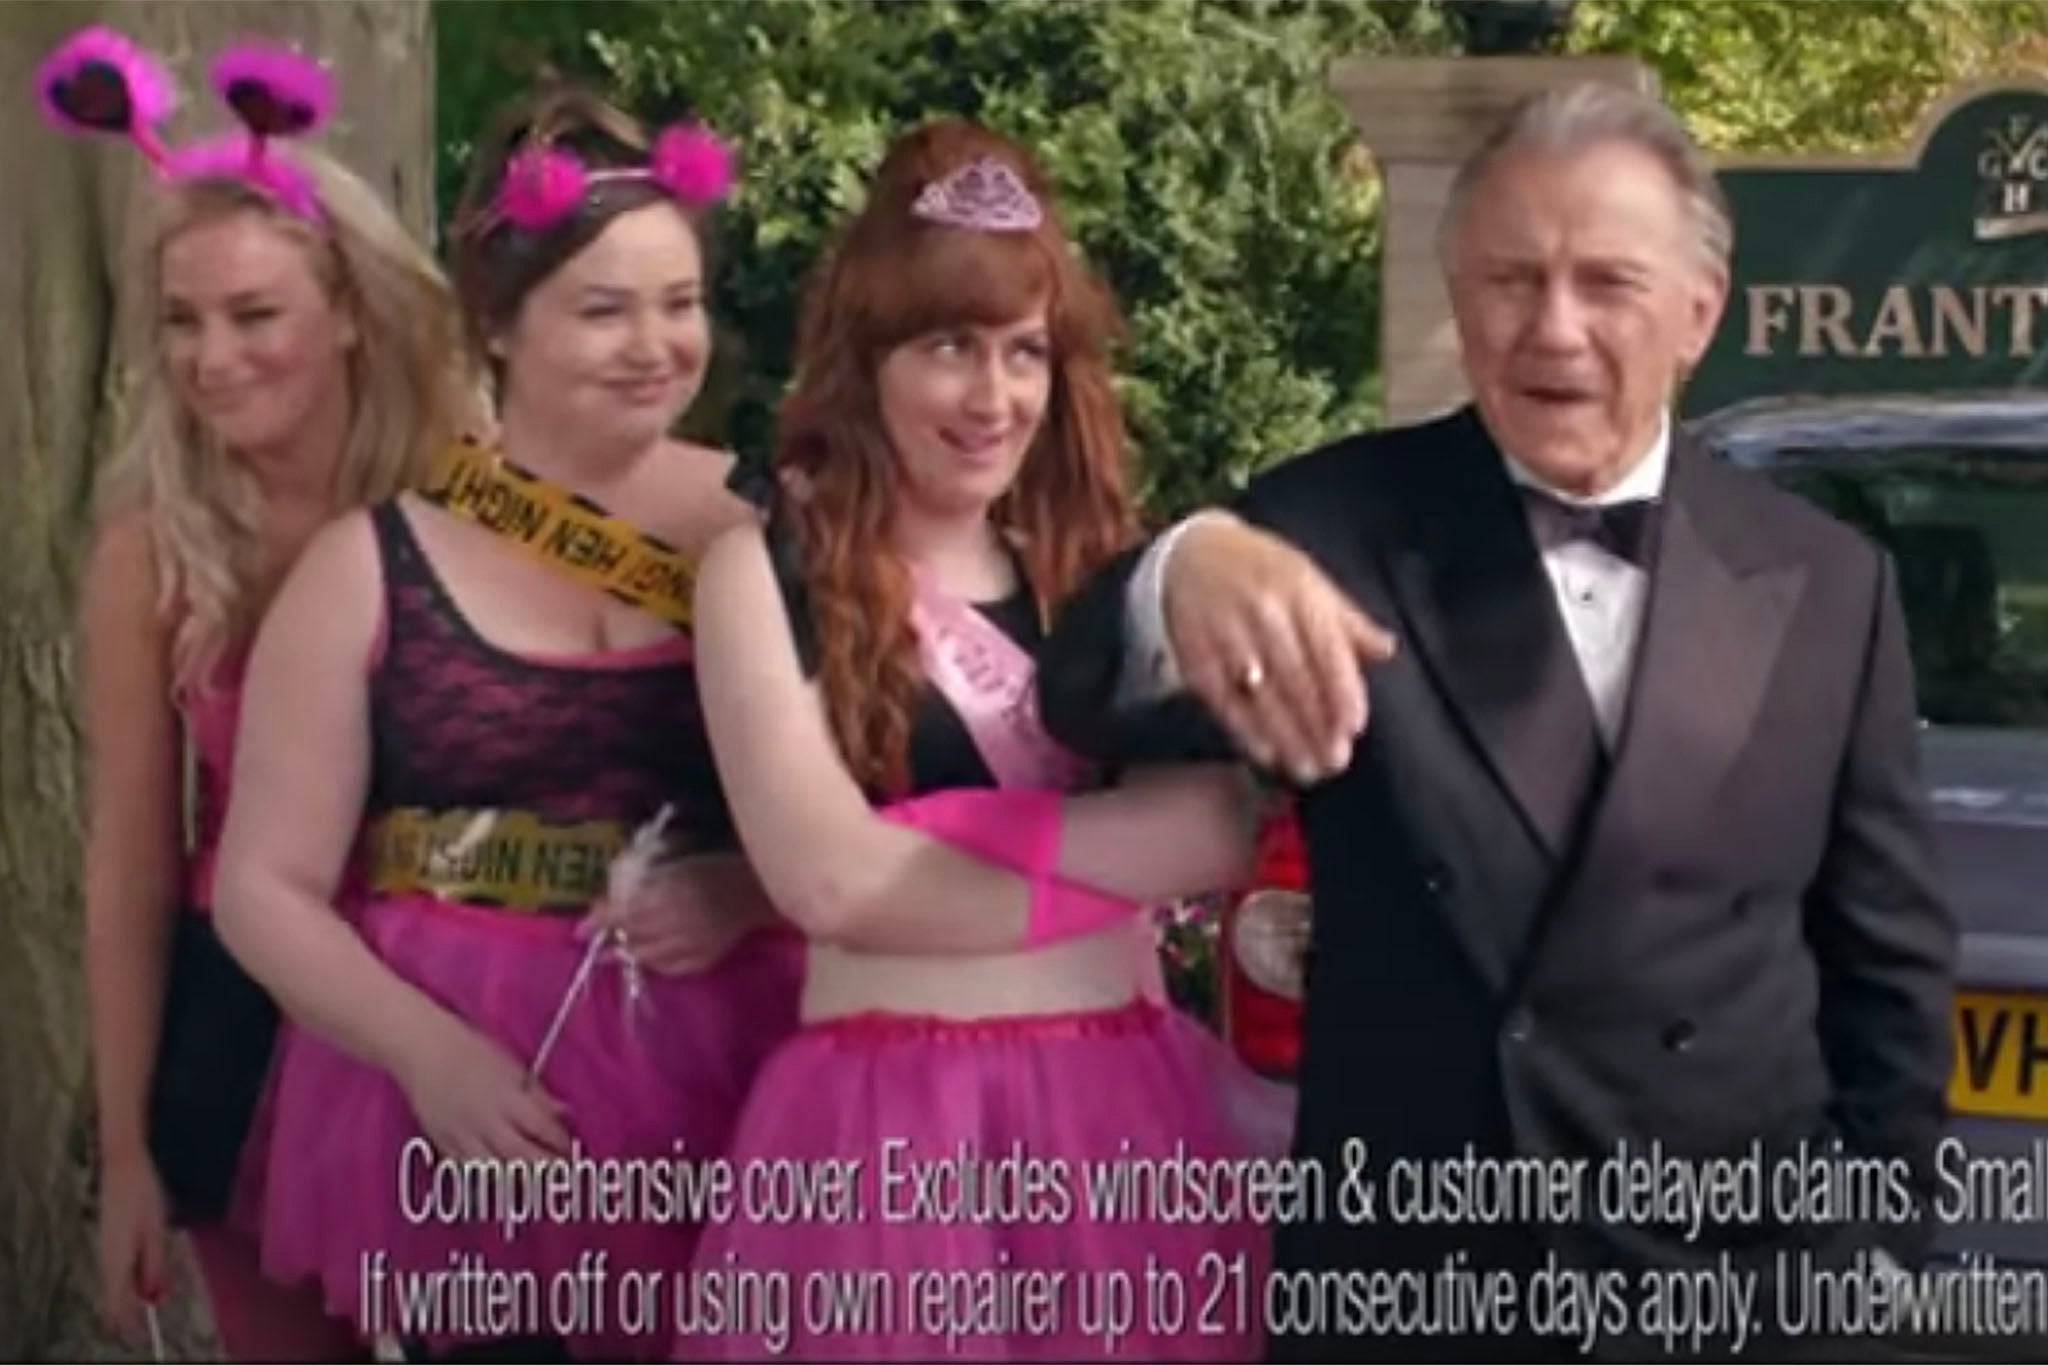 Scraping the barrel: Harvey Keitel rescues a stranded hen do in an advert for Direct Line